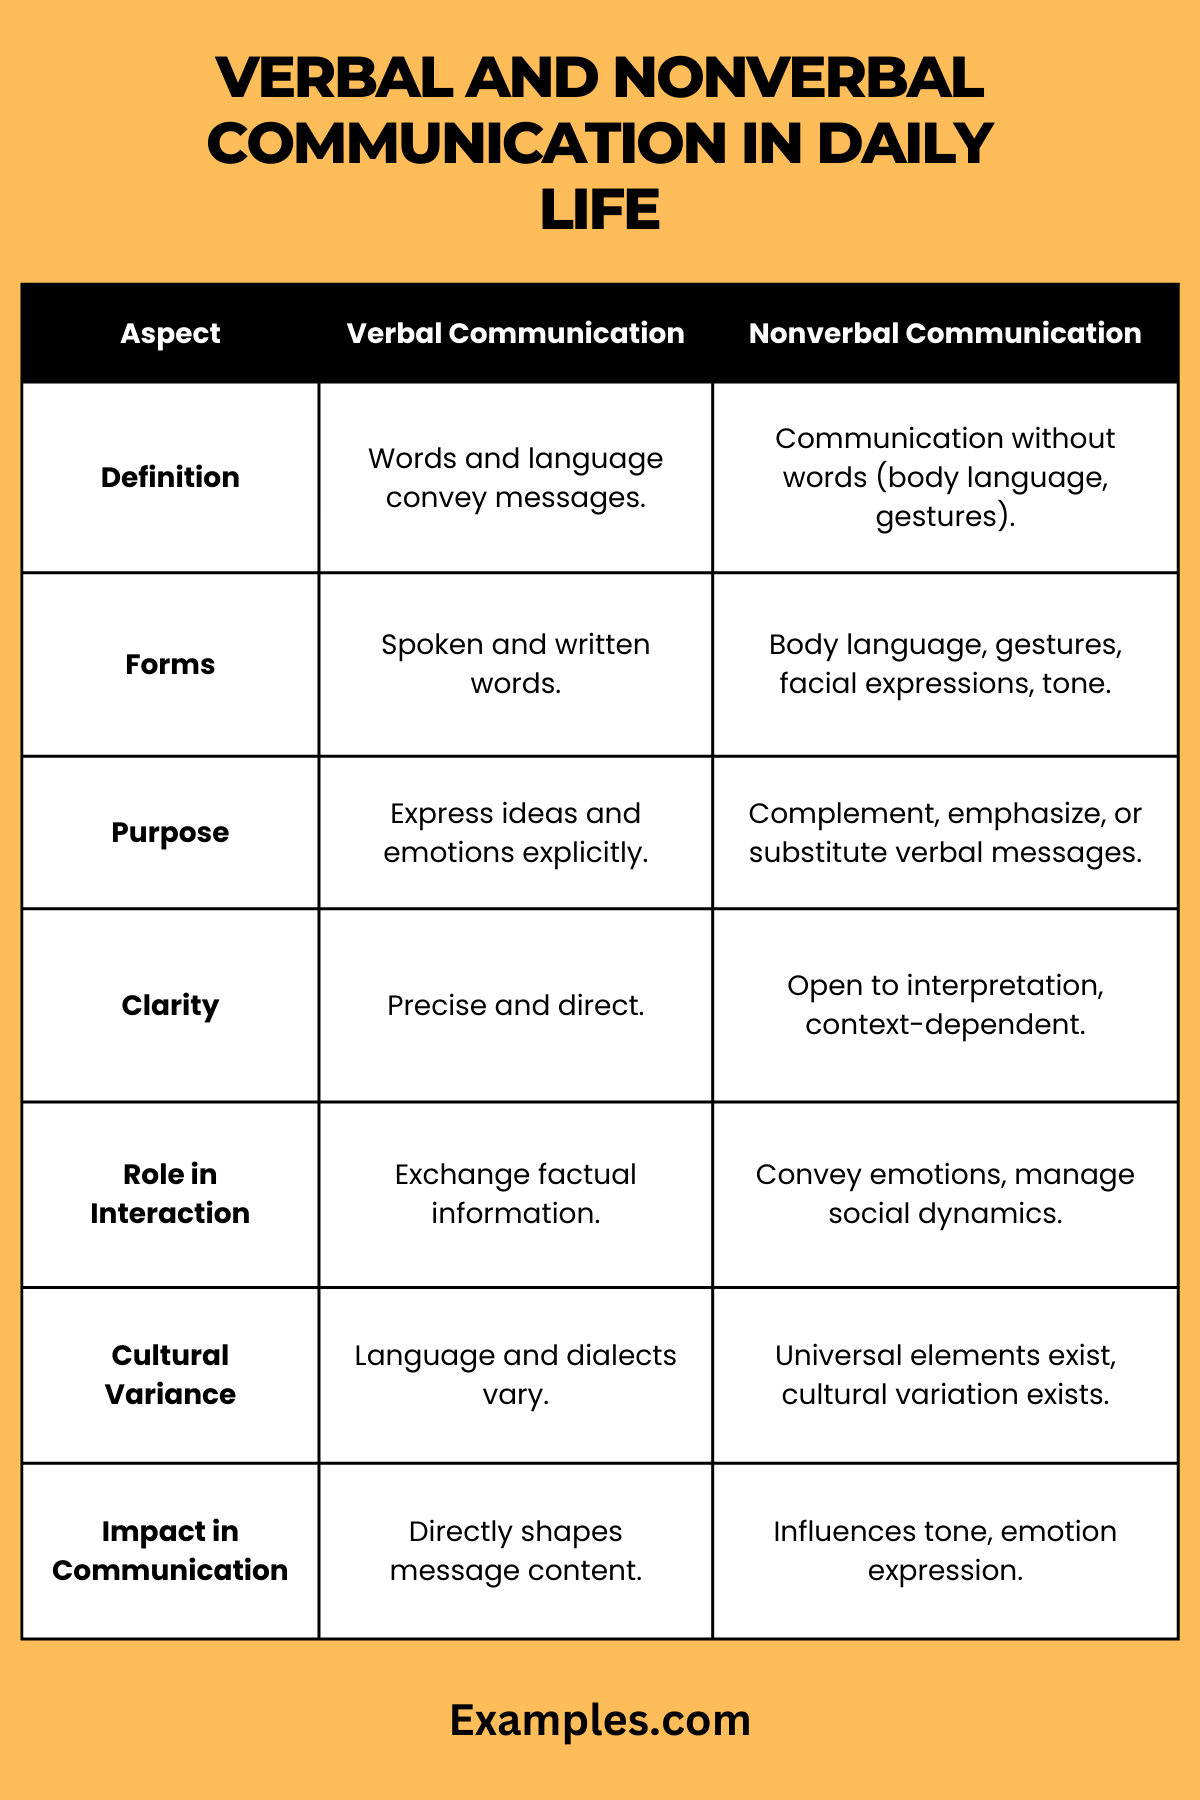 verbal and nonverbal communication in daily life